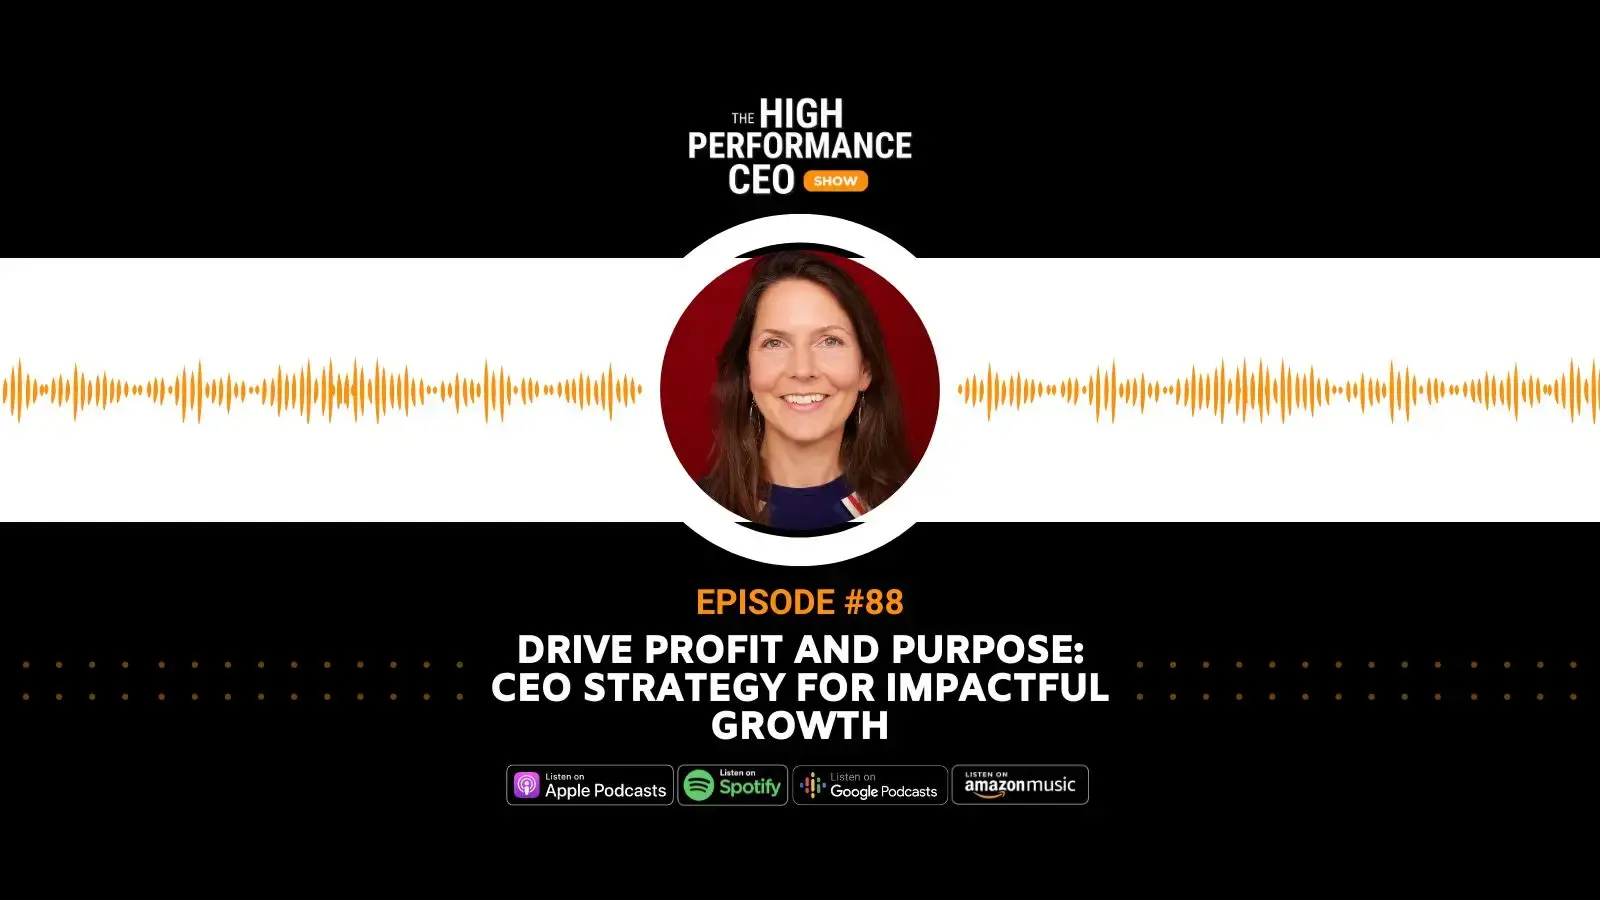 Drive Profit and Purpose: CEO Strategy for Impactful Growth